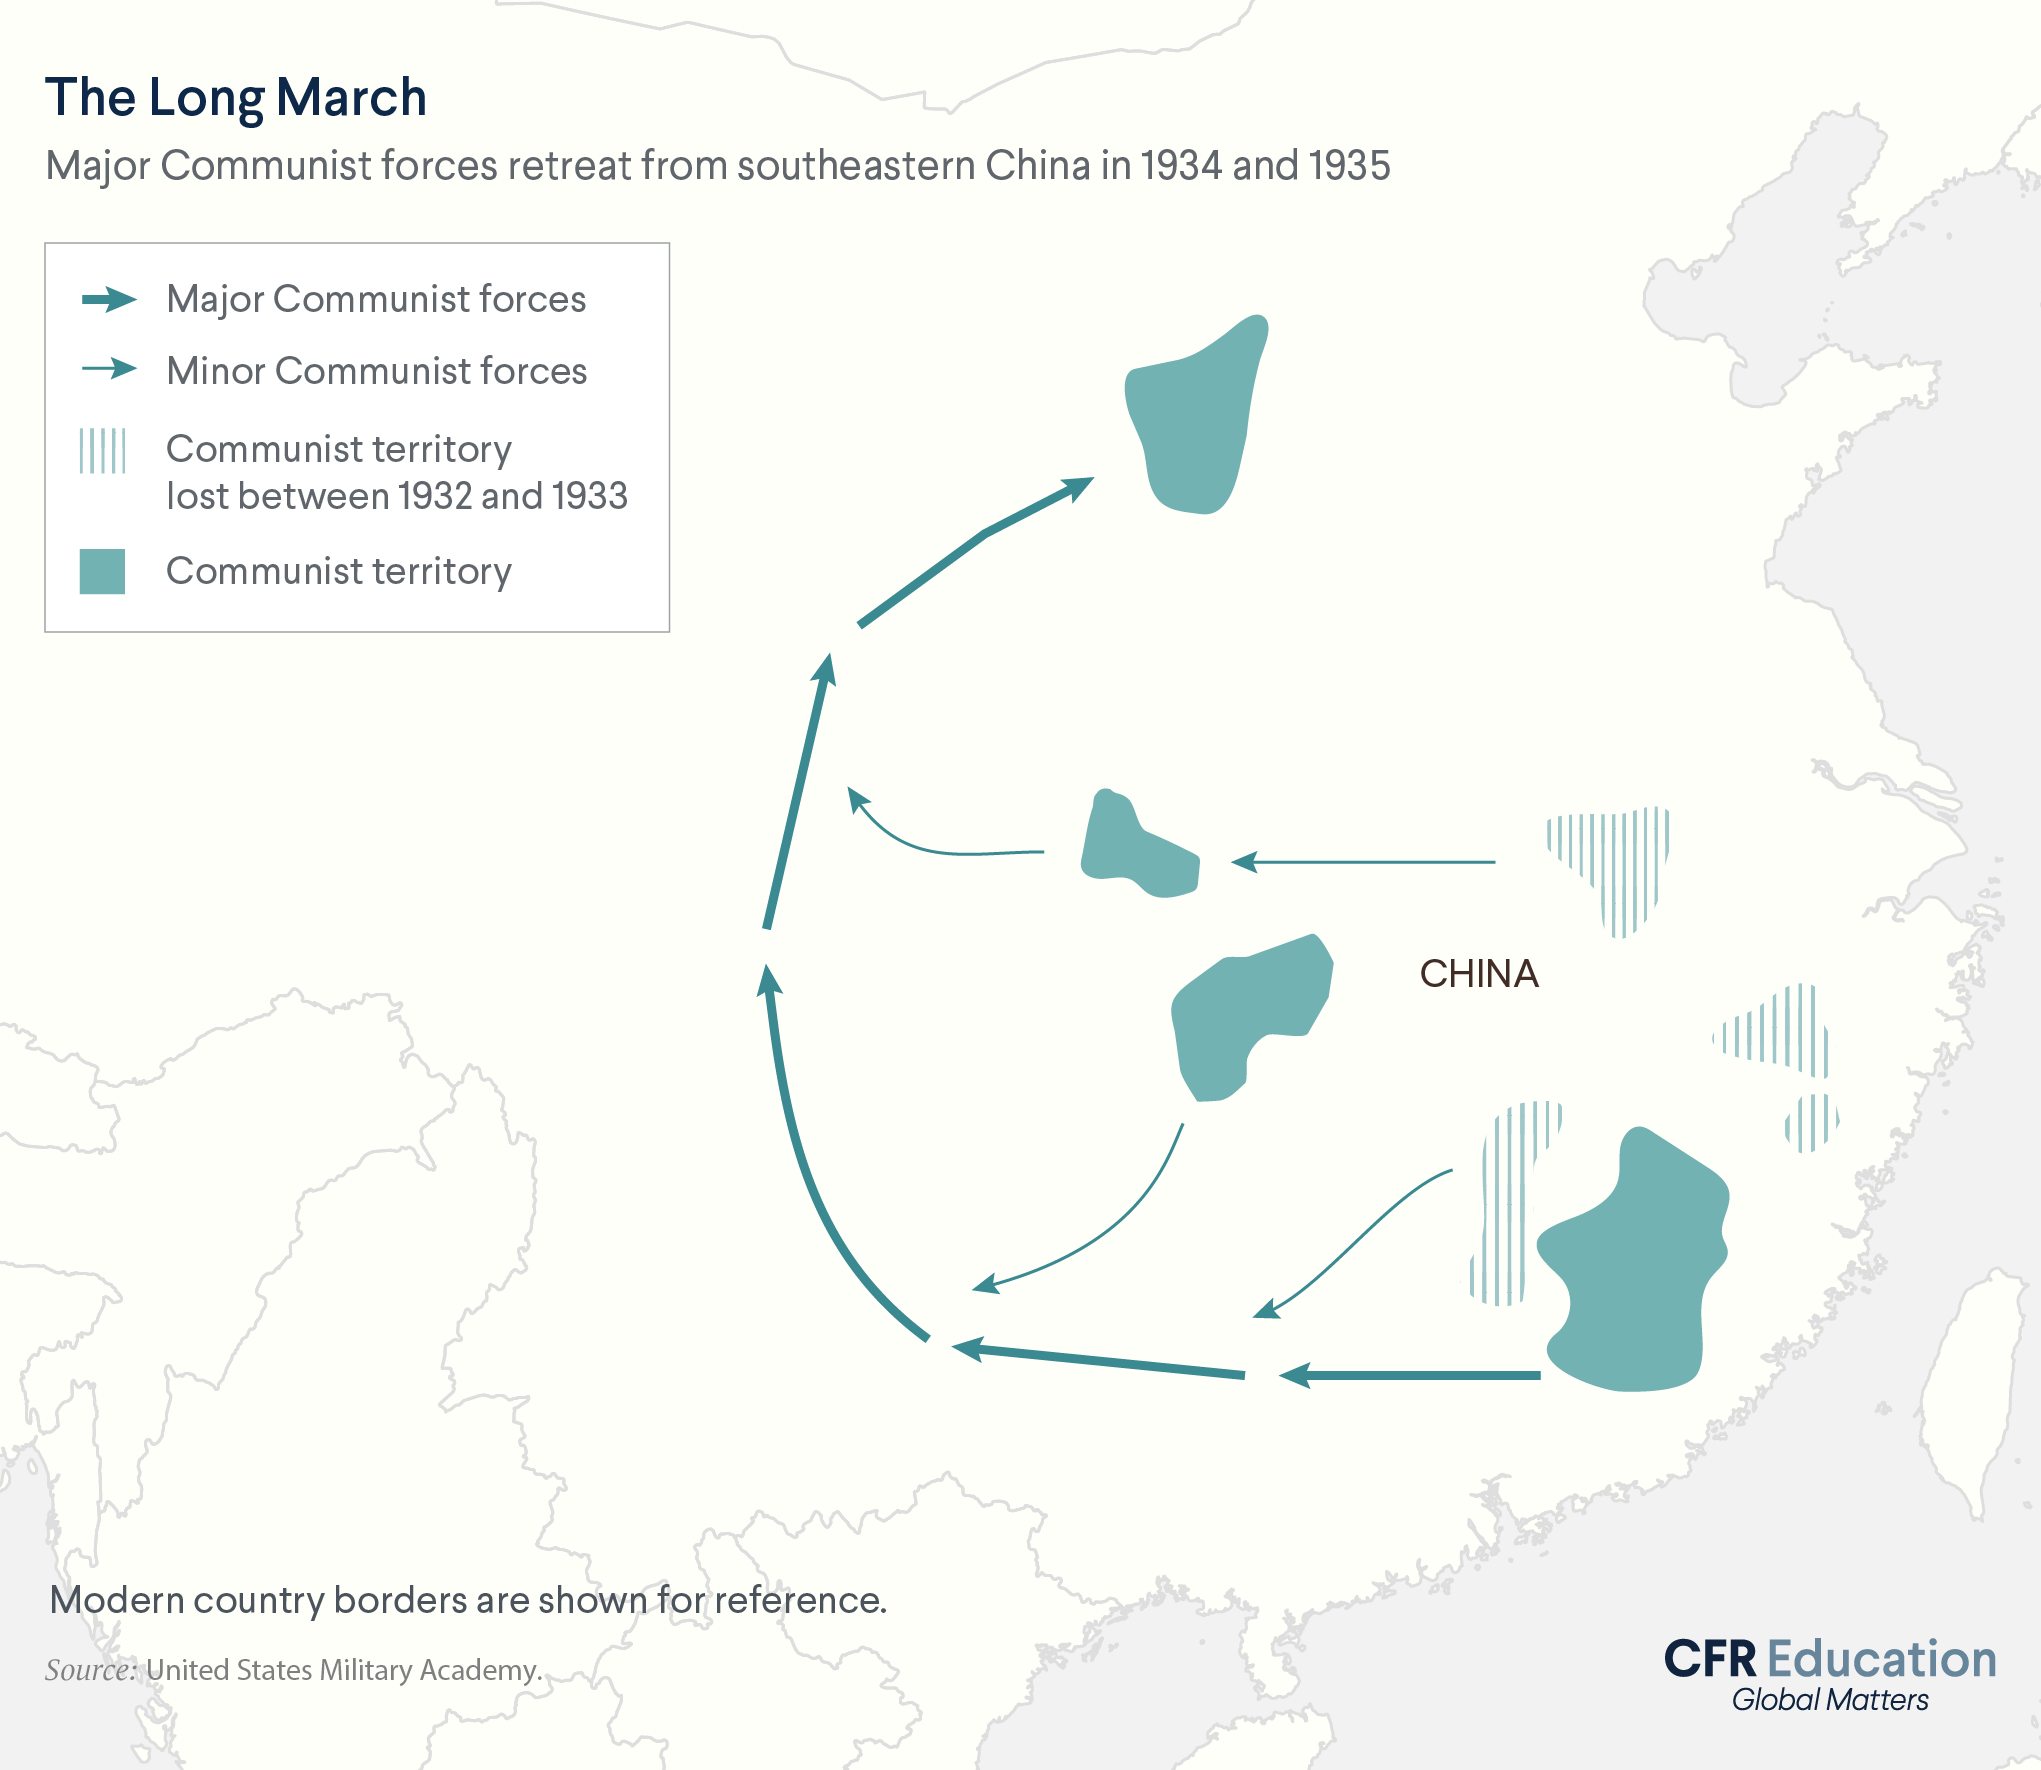 Map showing The Long March, the route major communist forces followed while retreating from southeastern China in 1934 and 1935. For more info contact us at cfr_education@cfr.org.